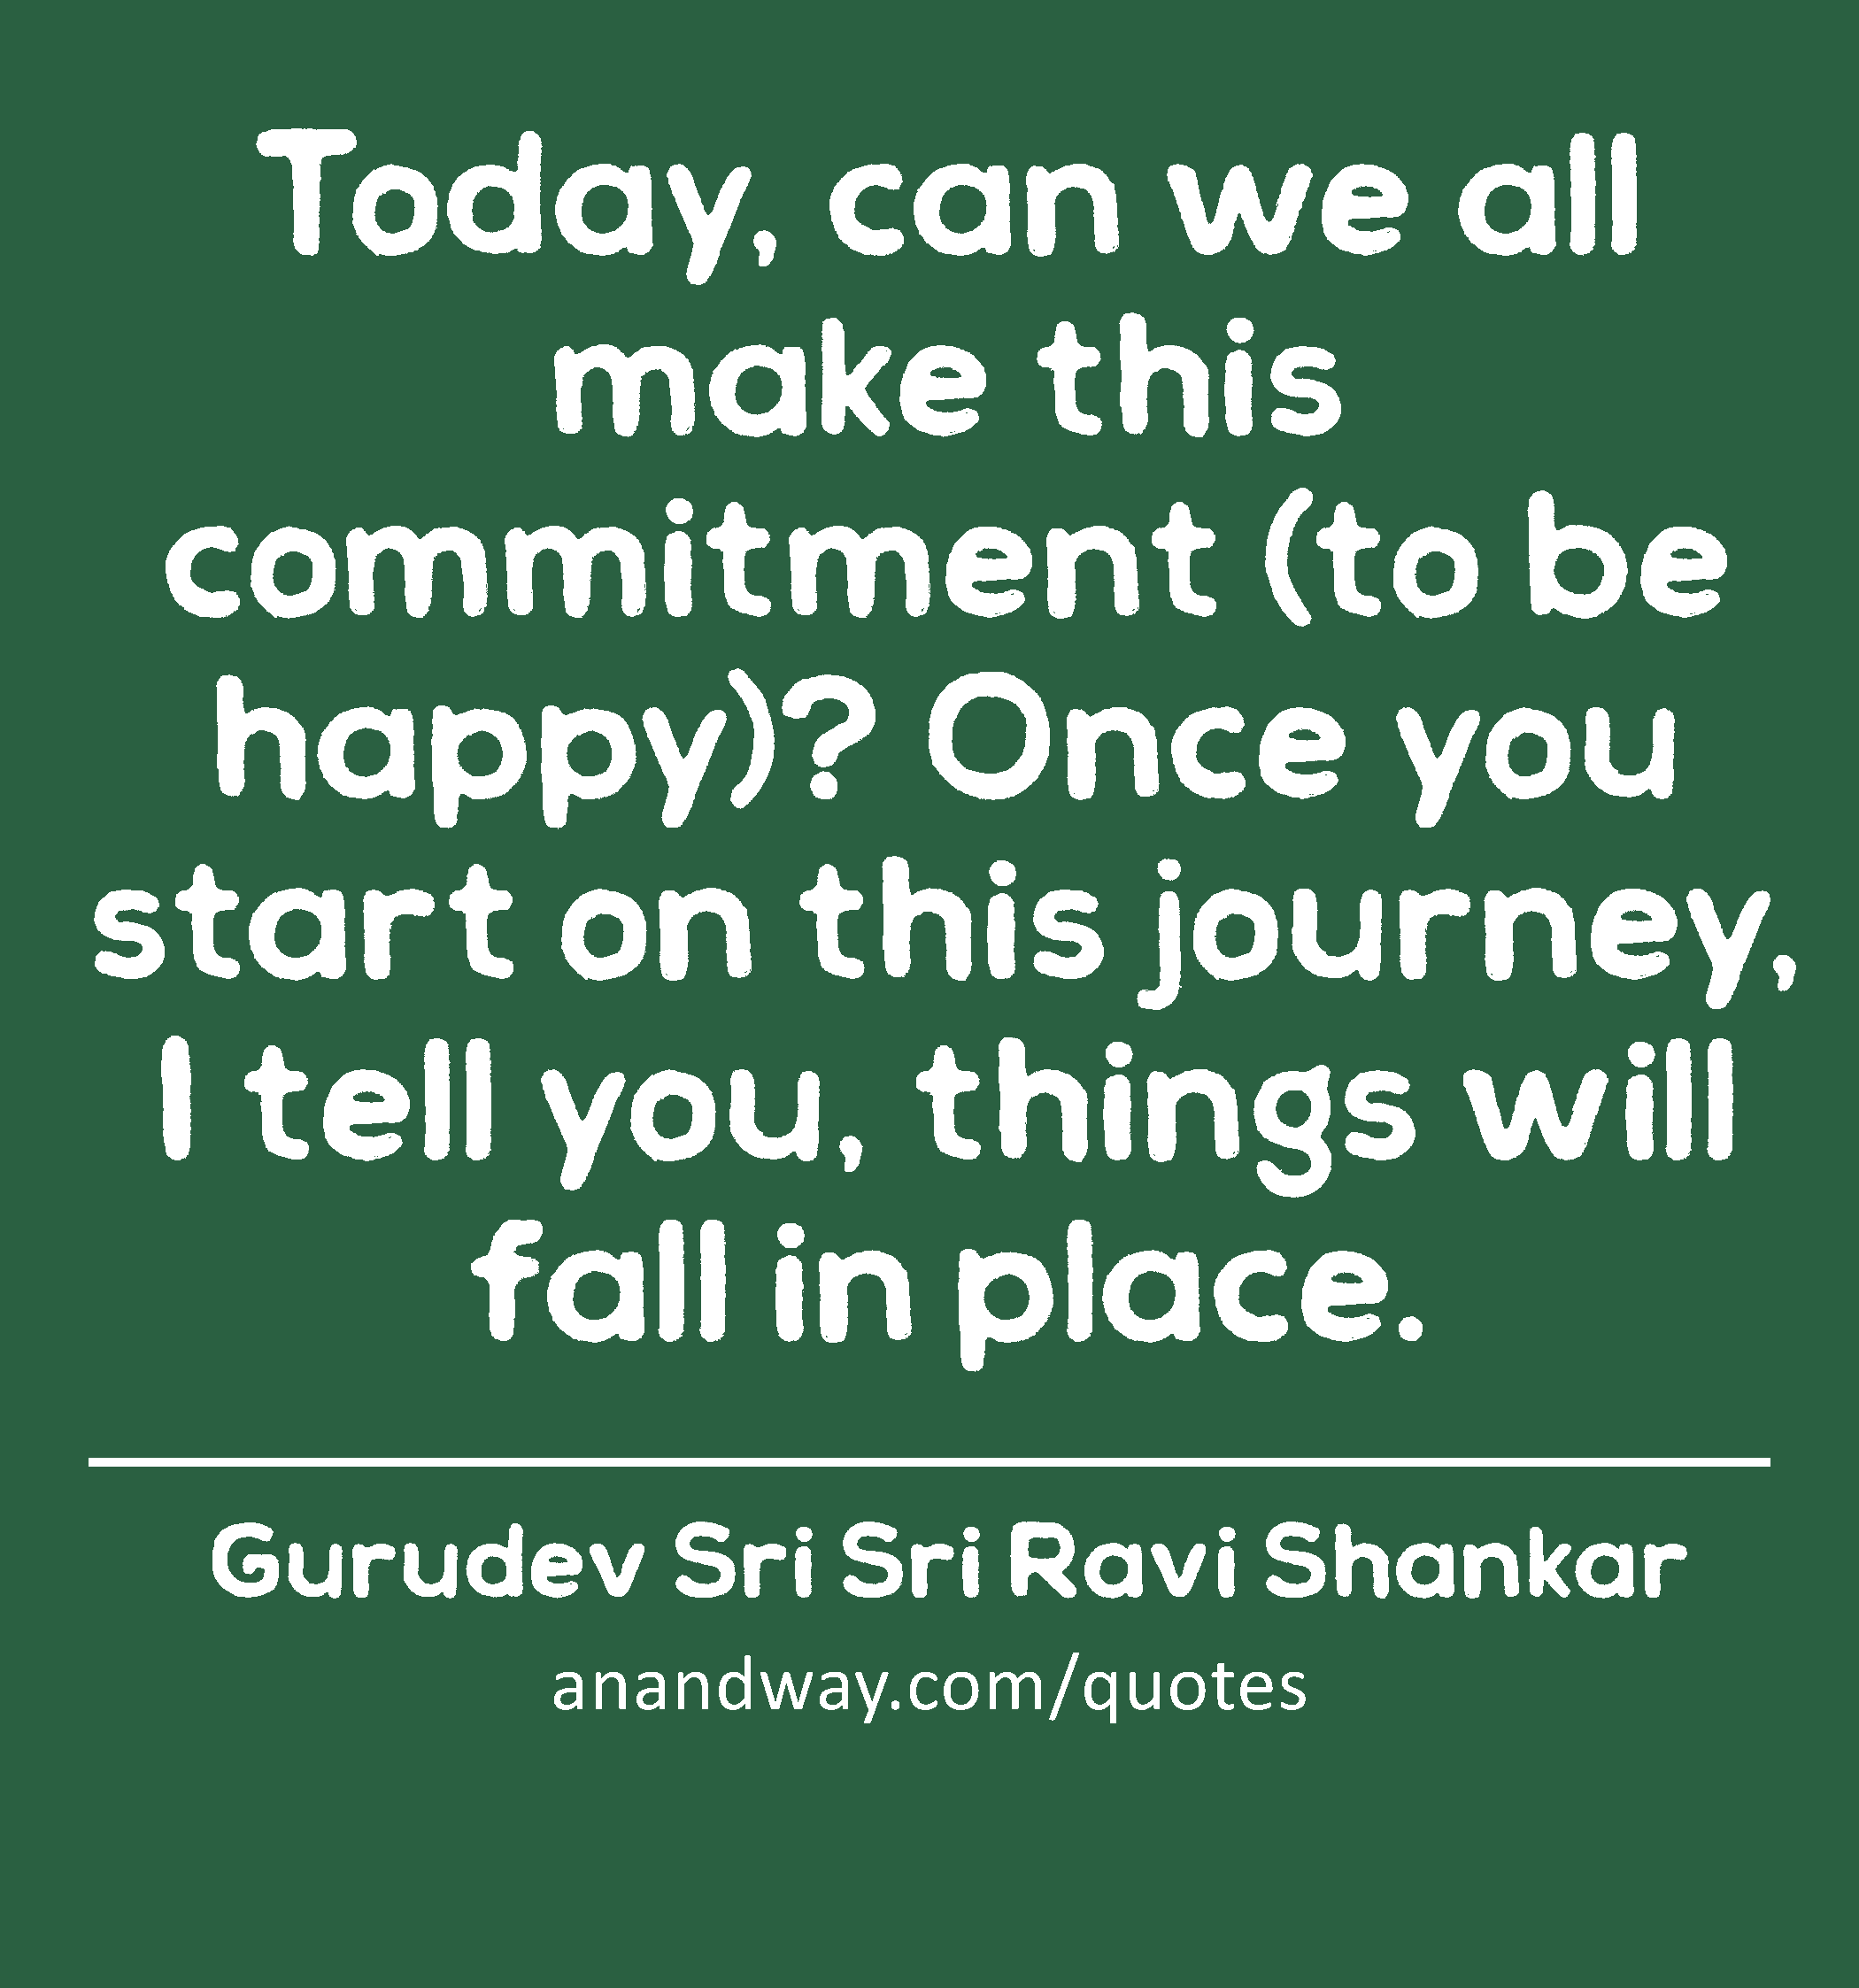 Today, can we all make this commitment (to be happy)? Once you start on this journey, I tell you,
 -Gurudev Sri Sri Ravi Shankar